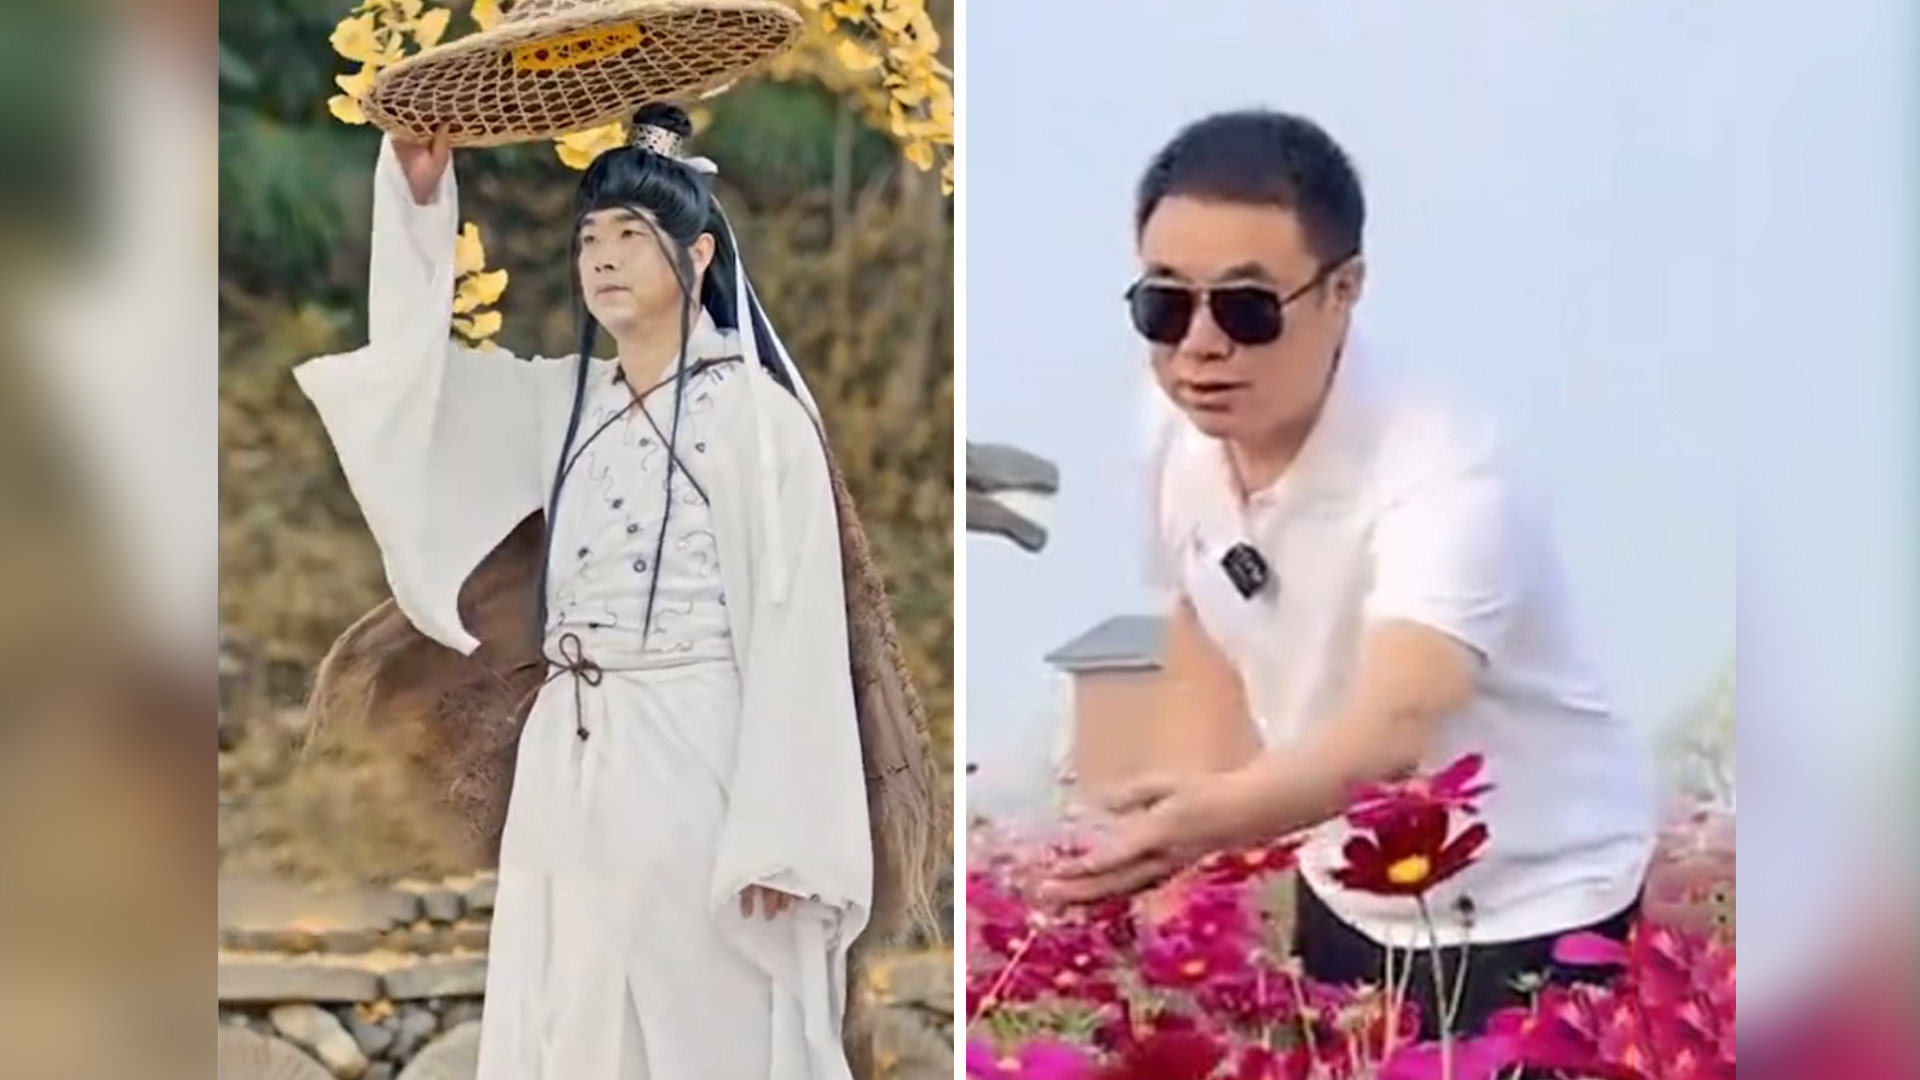 Xie said that he made the tourism clips because his employer couldn’t afford to pay a celebrity influencer and professionals to make them. Photo: SCMP composite